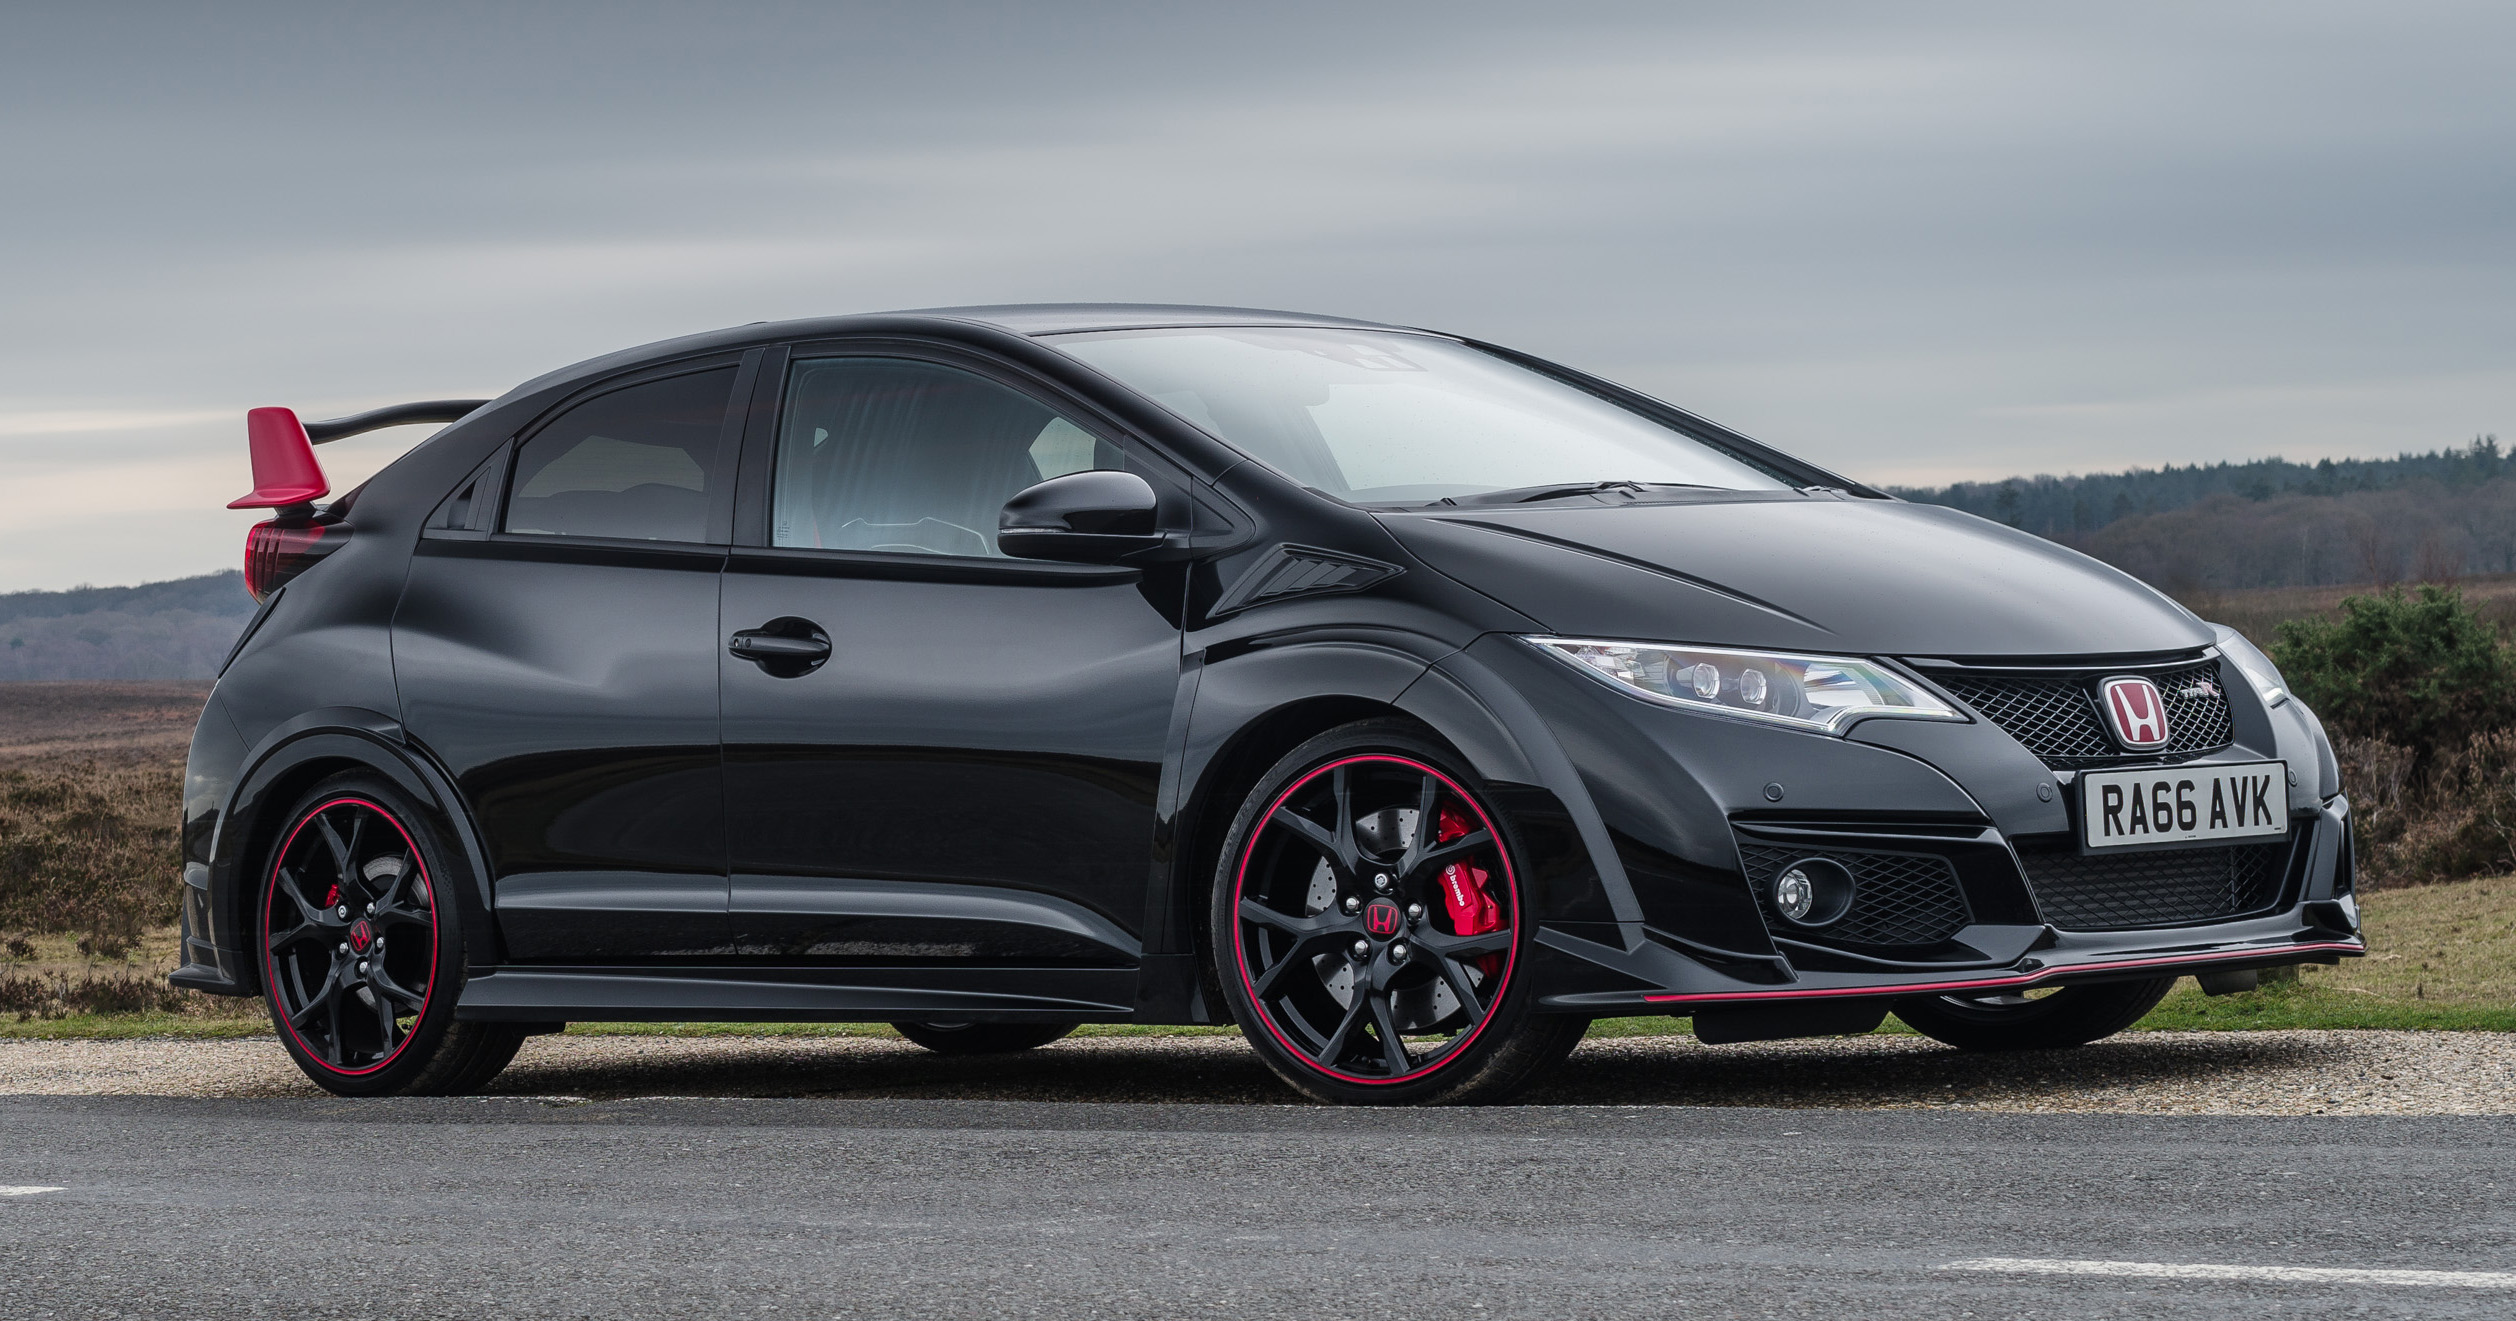 Honda Civic Type R Black Edition launched only 100